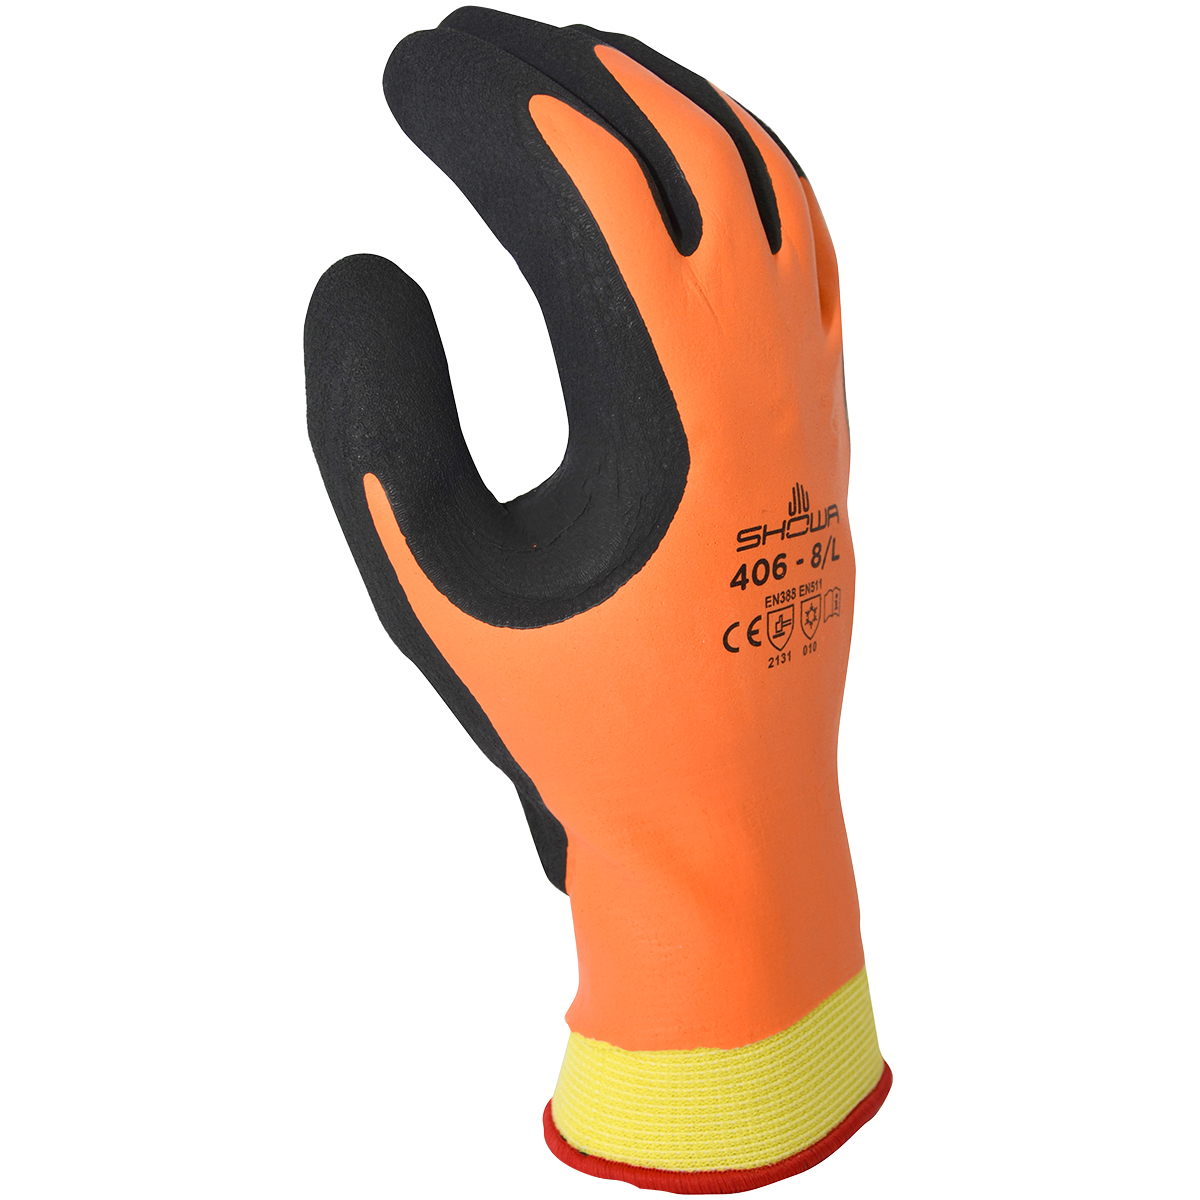 General purpose, dual natural rubber palm coating, acrylic nylon polyester insulated seamless liner, orange w/black coating, rough finish, large